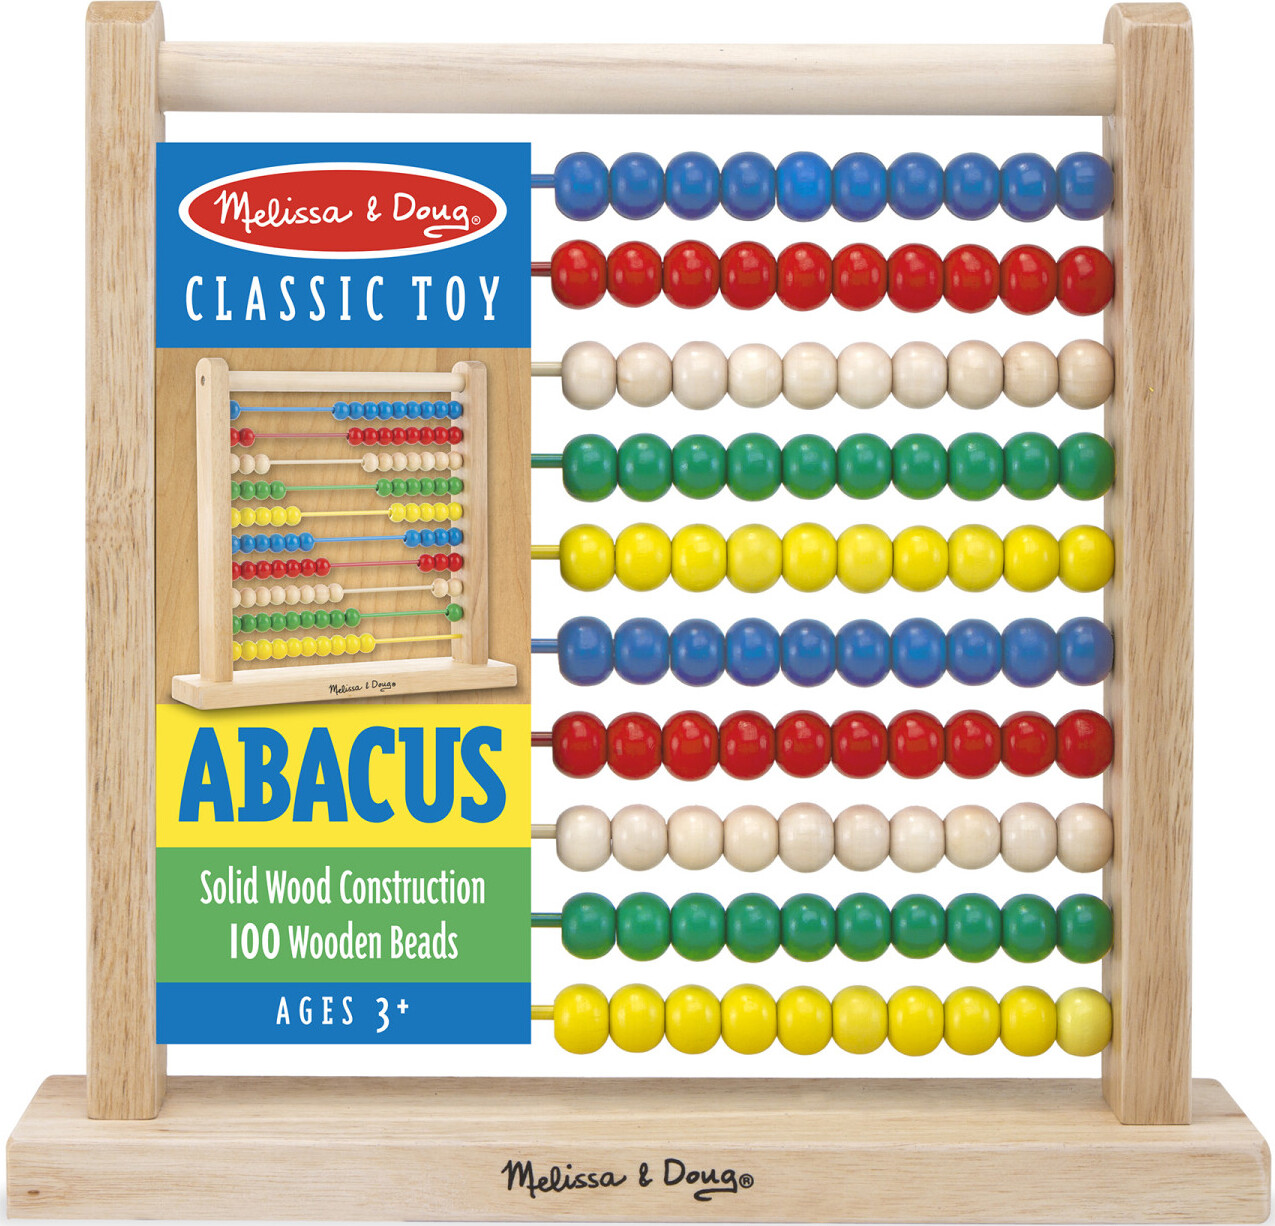 melissa and doug abacus instructions